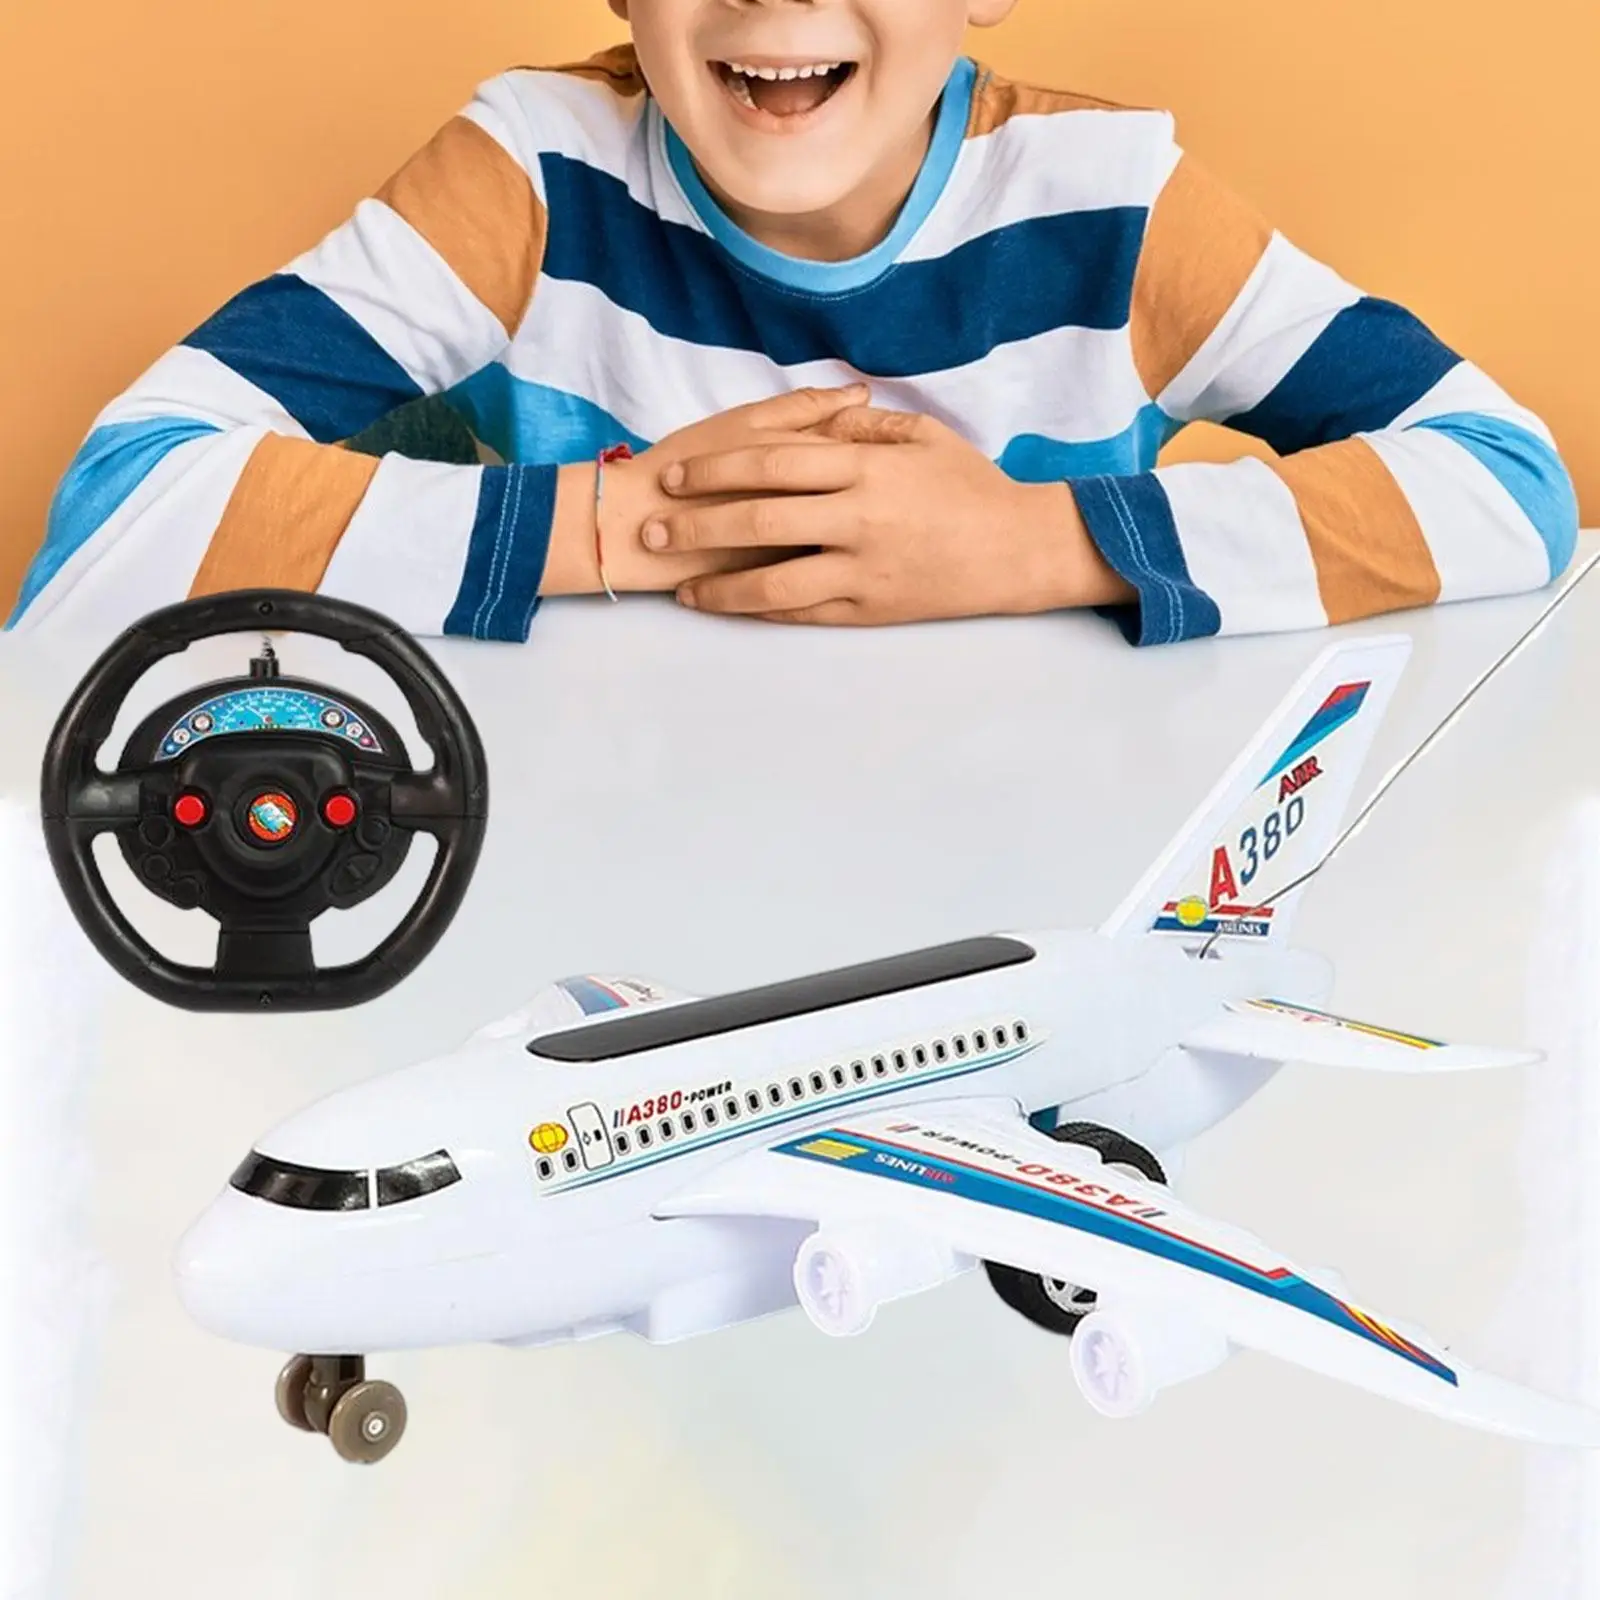 RC Airplane Aircraft 2CH Passenger Plane for Beginners Kids Birthday Gift